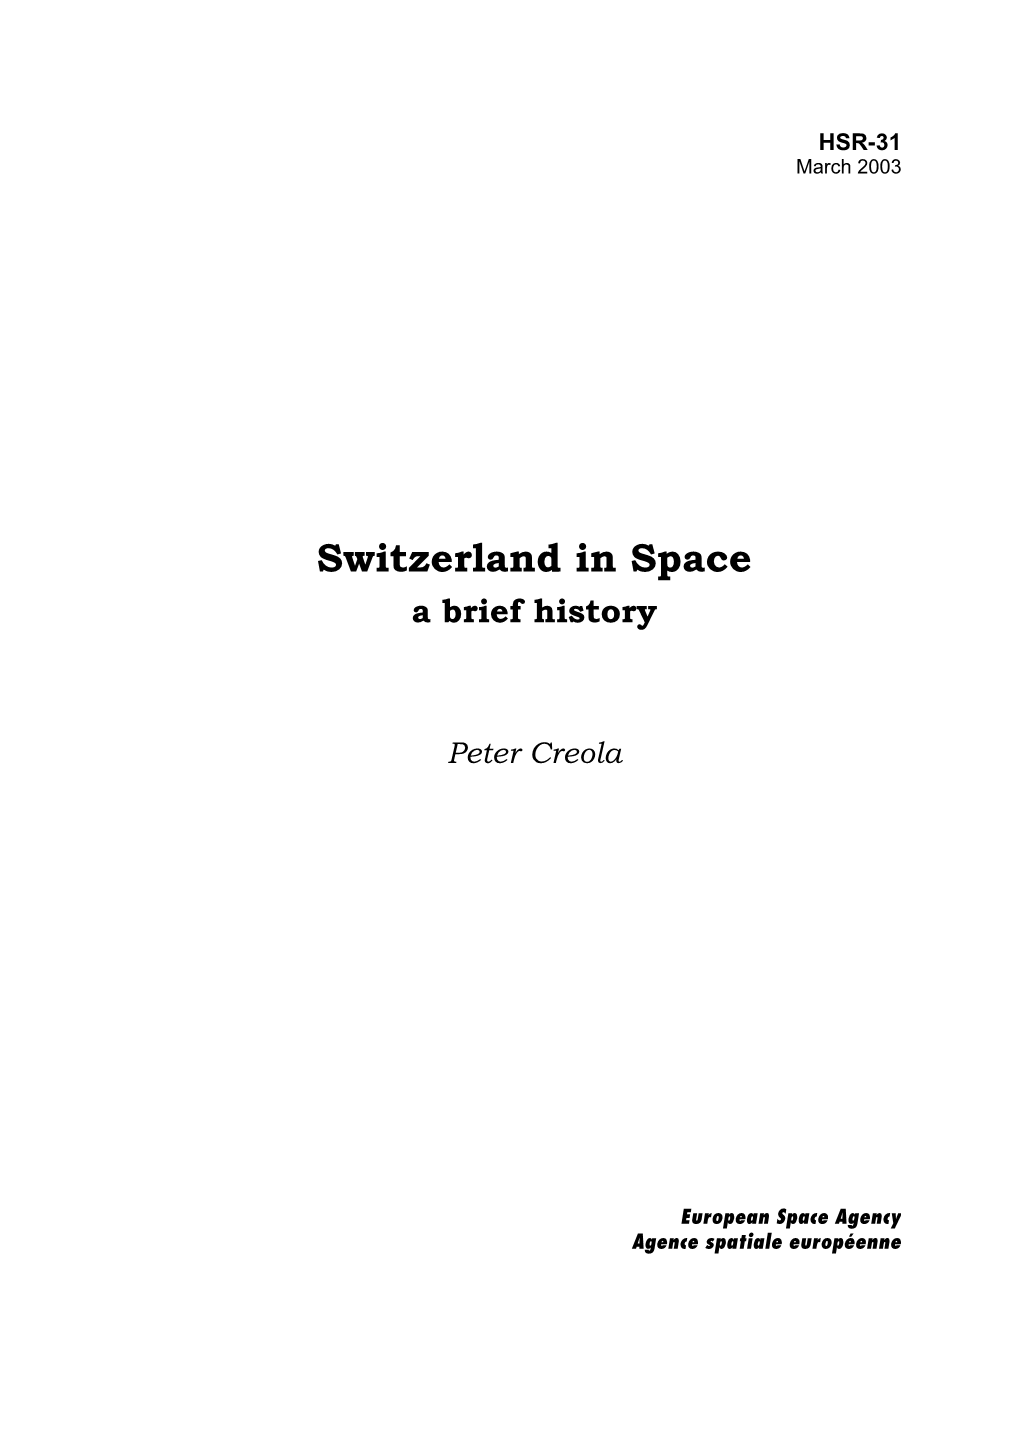 Switzerland in Space a Brief History